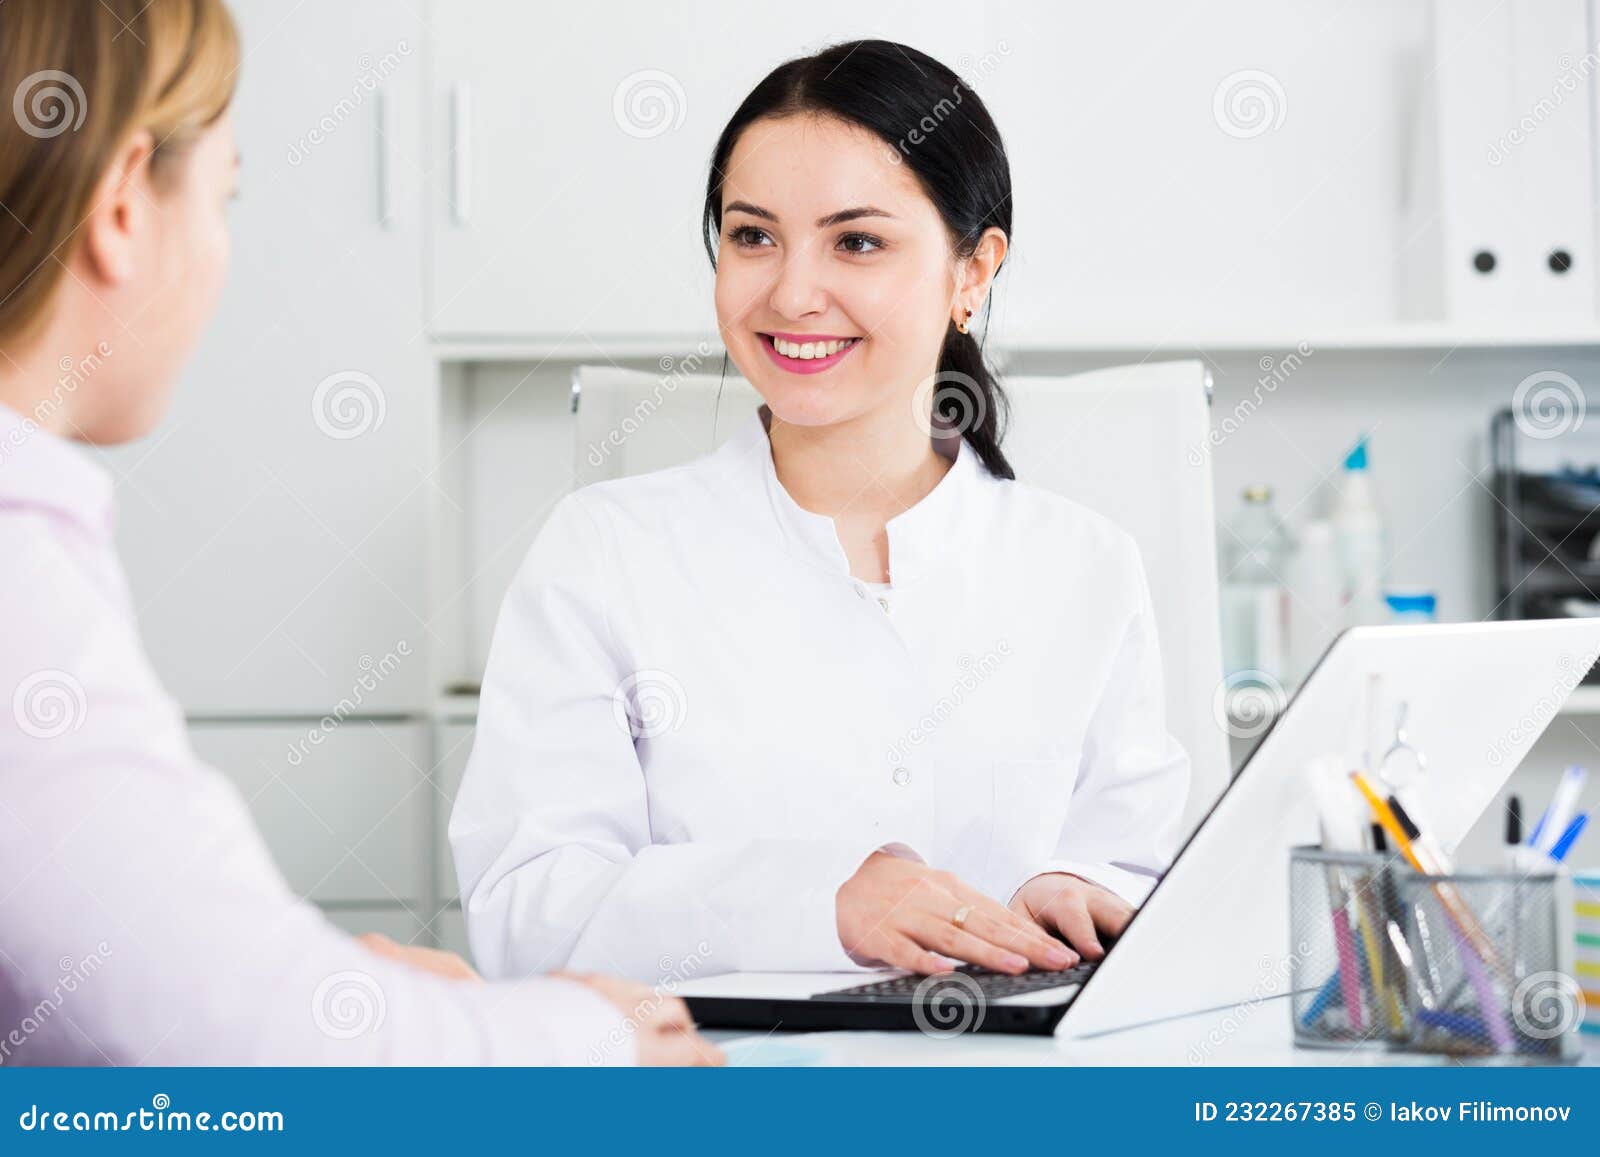 Nurse making appointment for client. Young female nurse makes appointment for visitor at reception